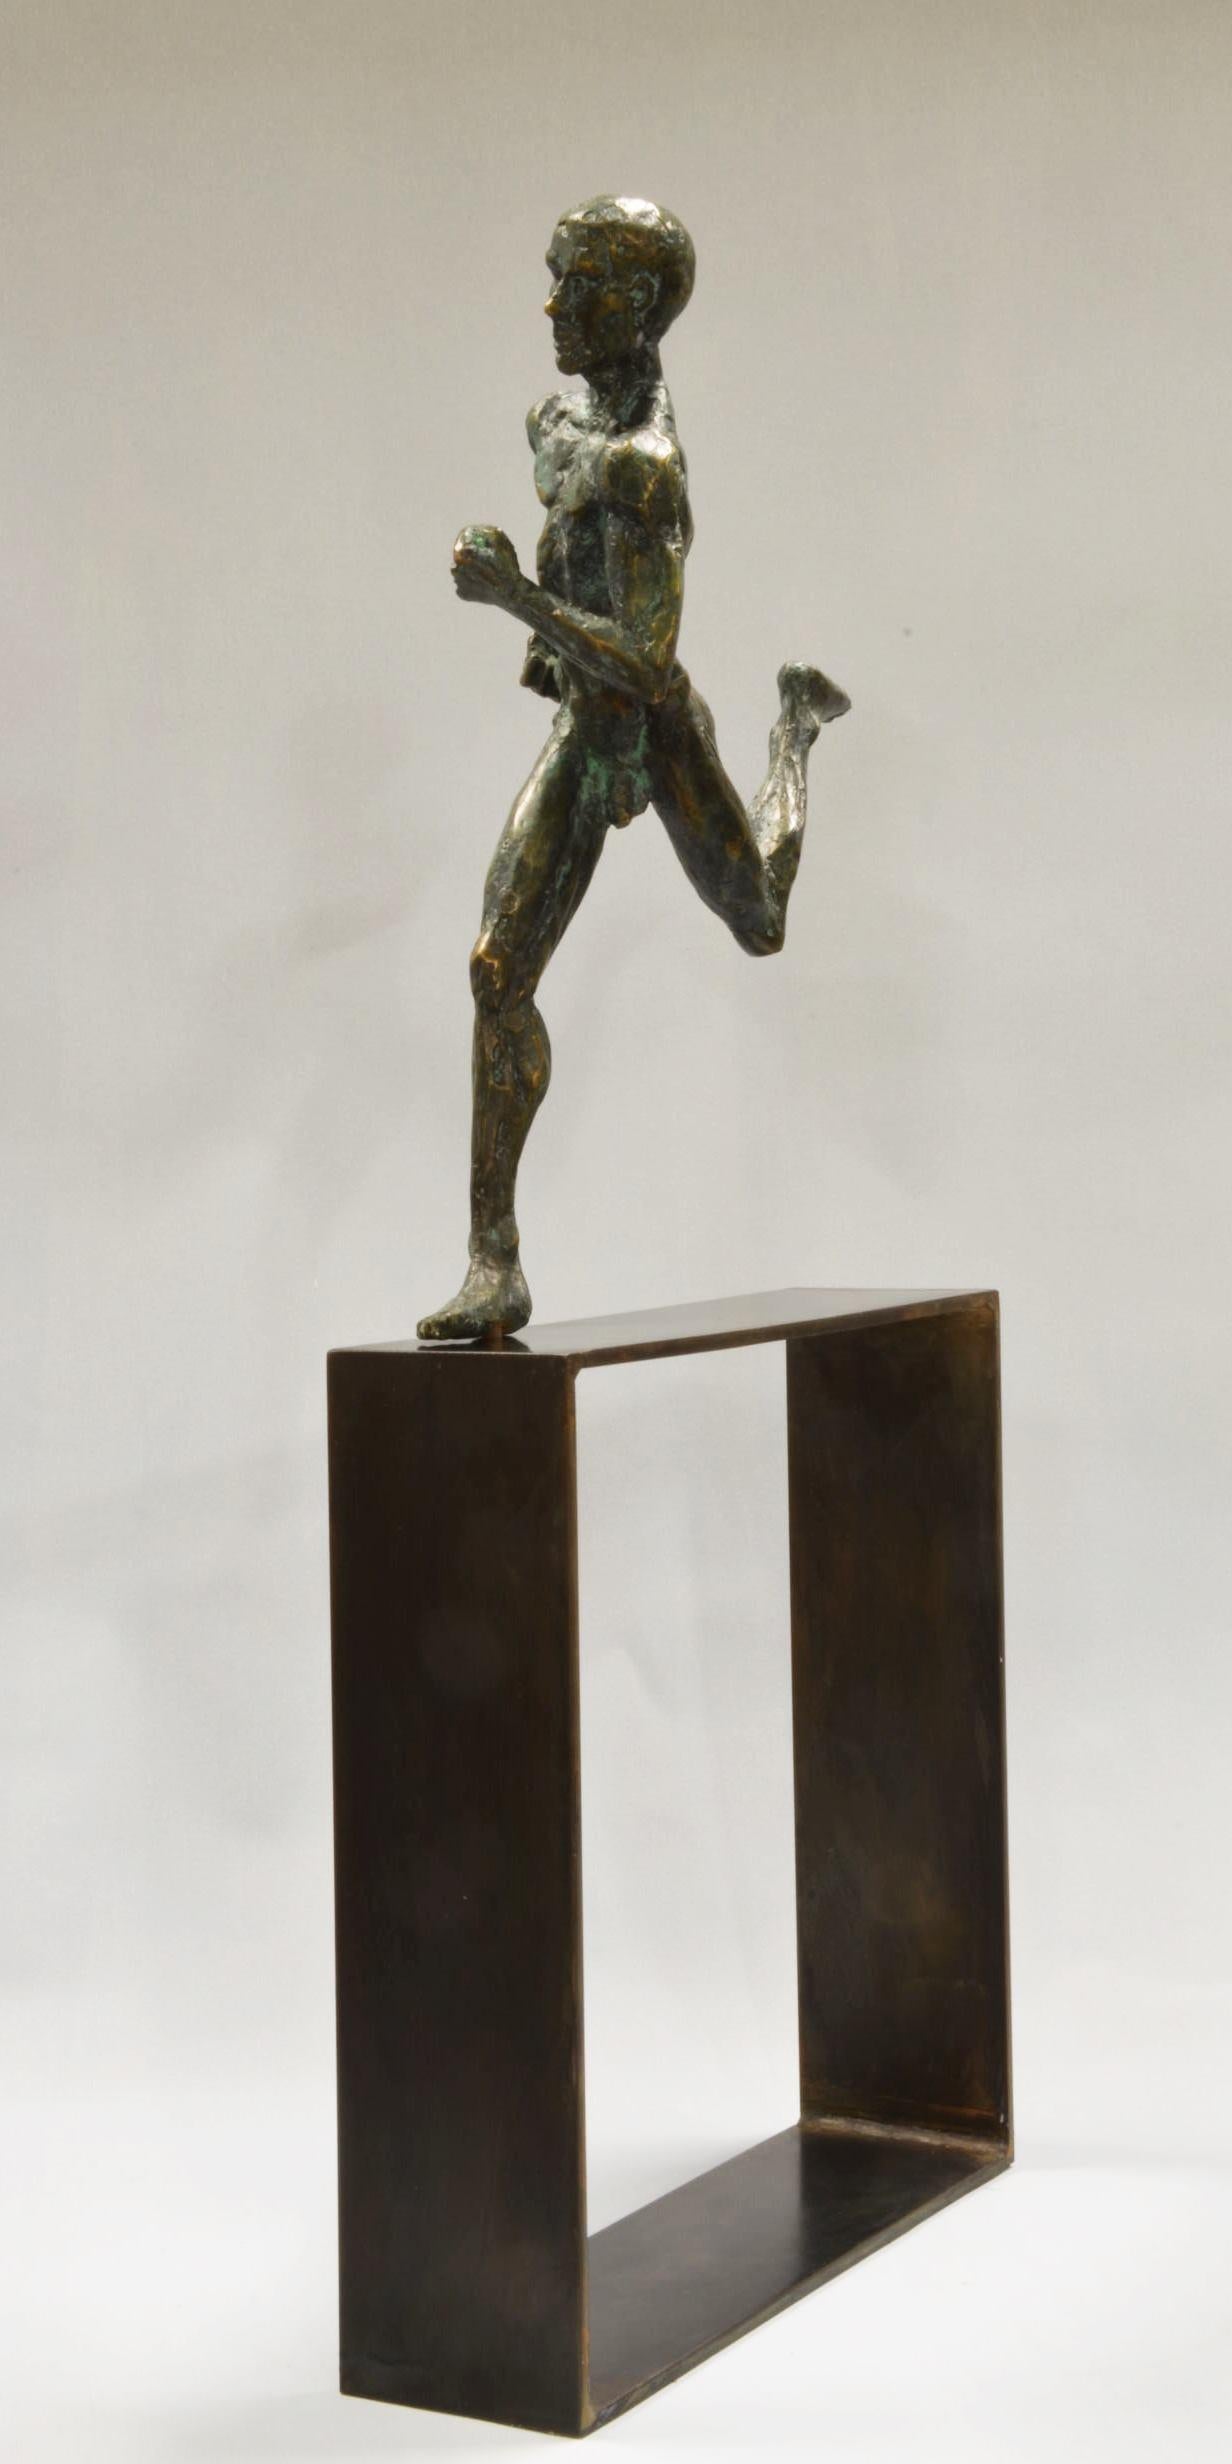 Marathon Runner, bronze sculpture by French contemporary artist Yann Guillon.
Limited edition of 8 + 4 artist's proofs, signed and numbered. Metal Base.
Yann Guillon focuses his work on the human body, using an expressionist approach to